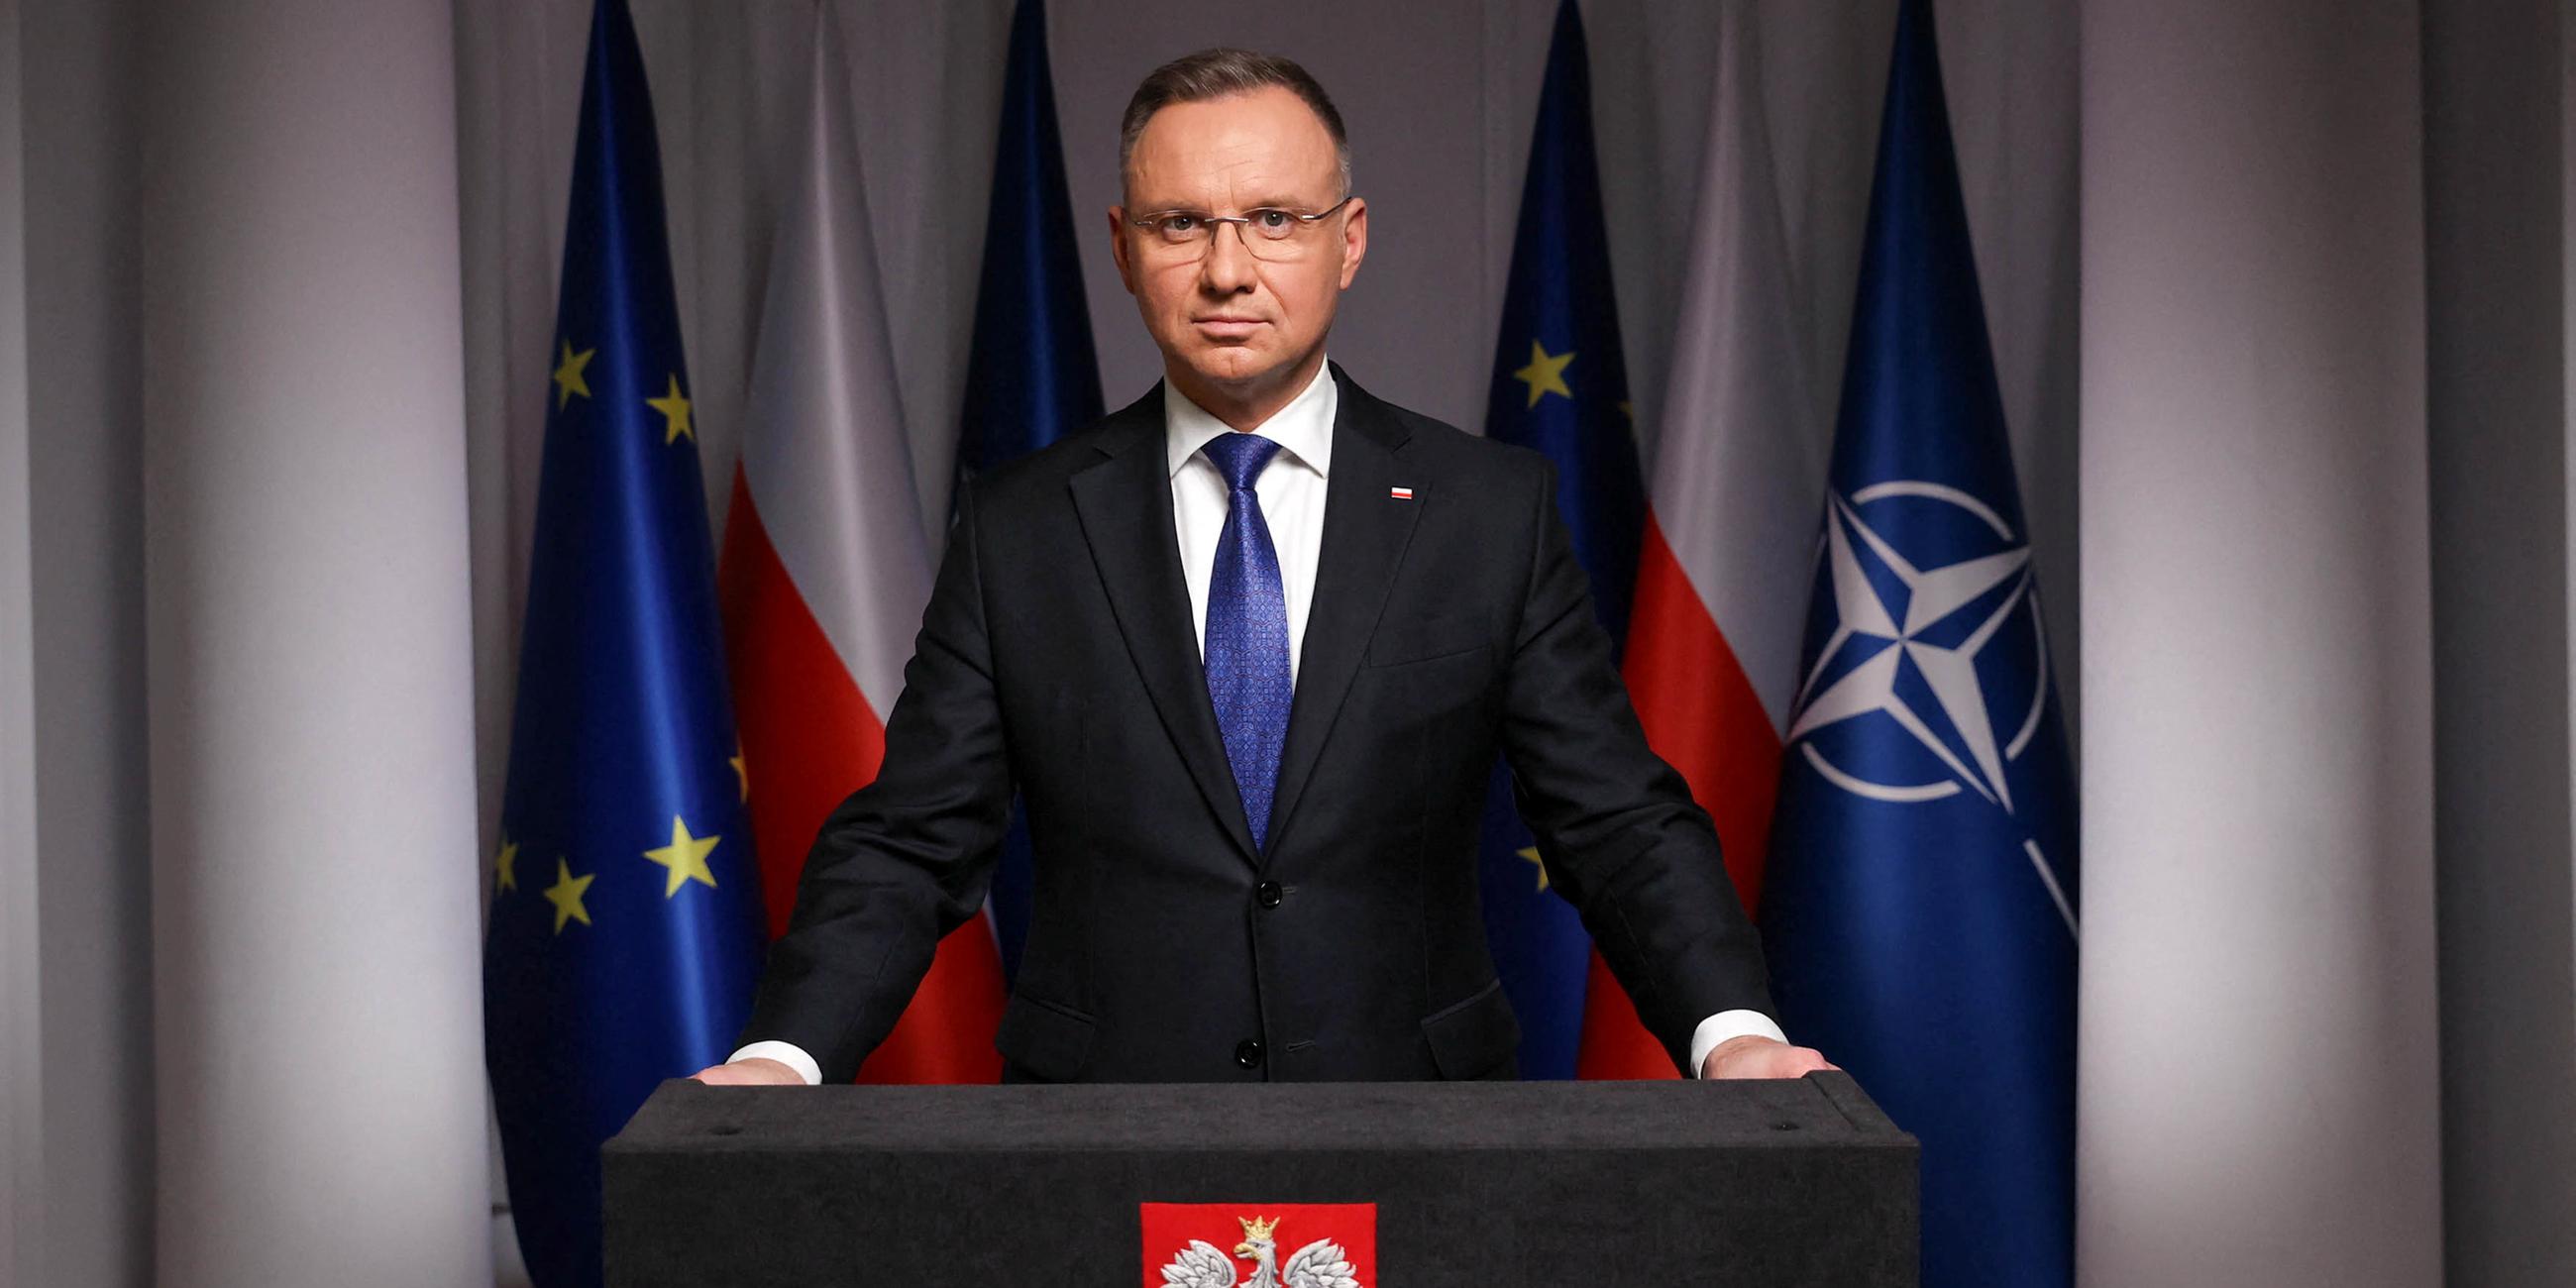 Polish President Andrzej Duda speaks during a televised announcement at Presidential Palace, in Warsaw